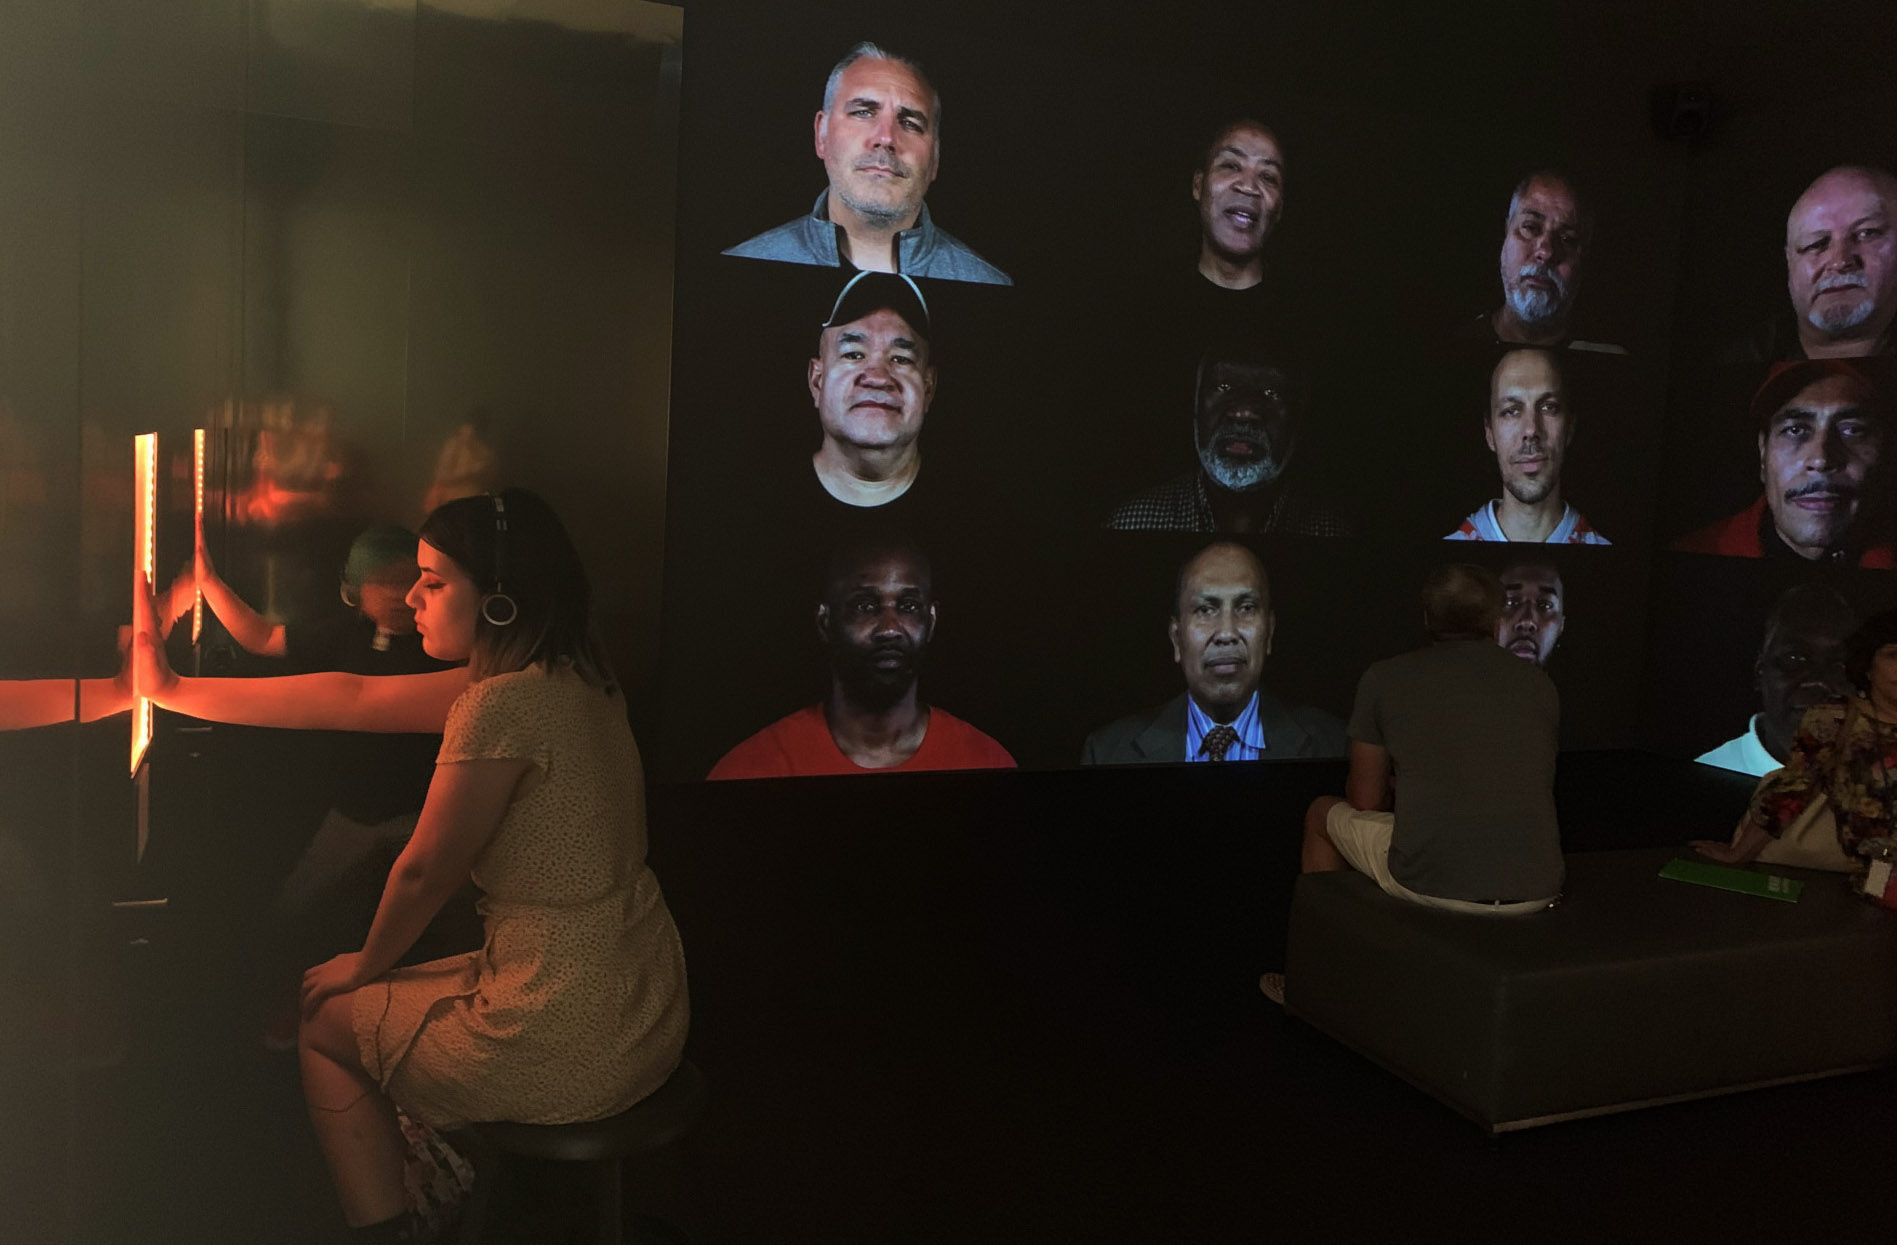 Installation shot showing human faces on a screen